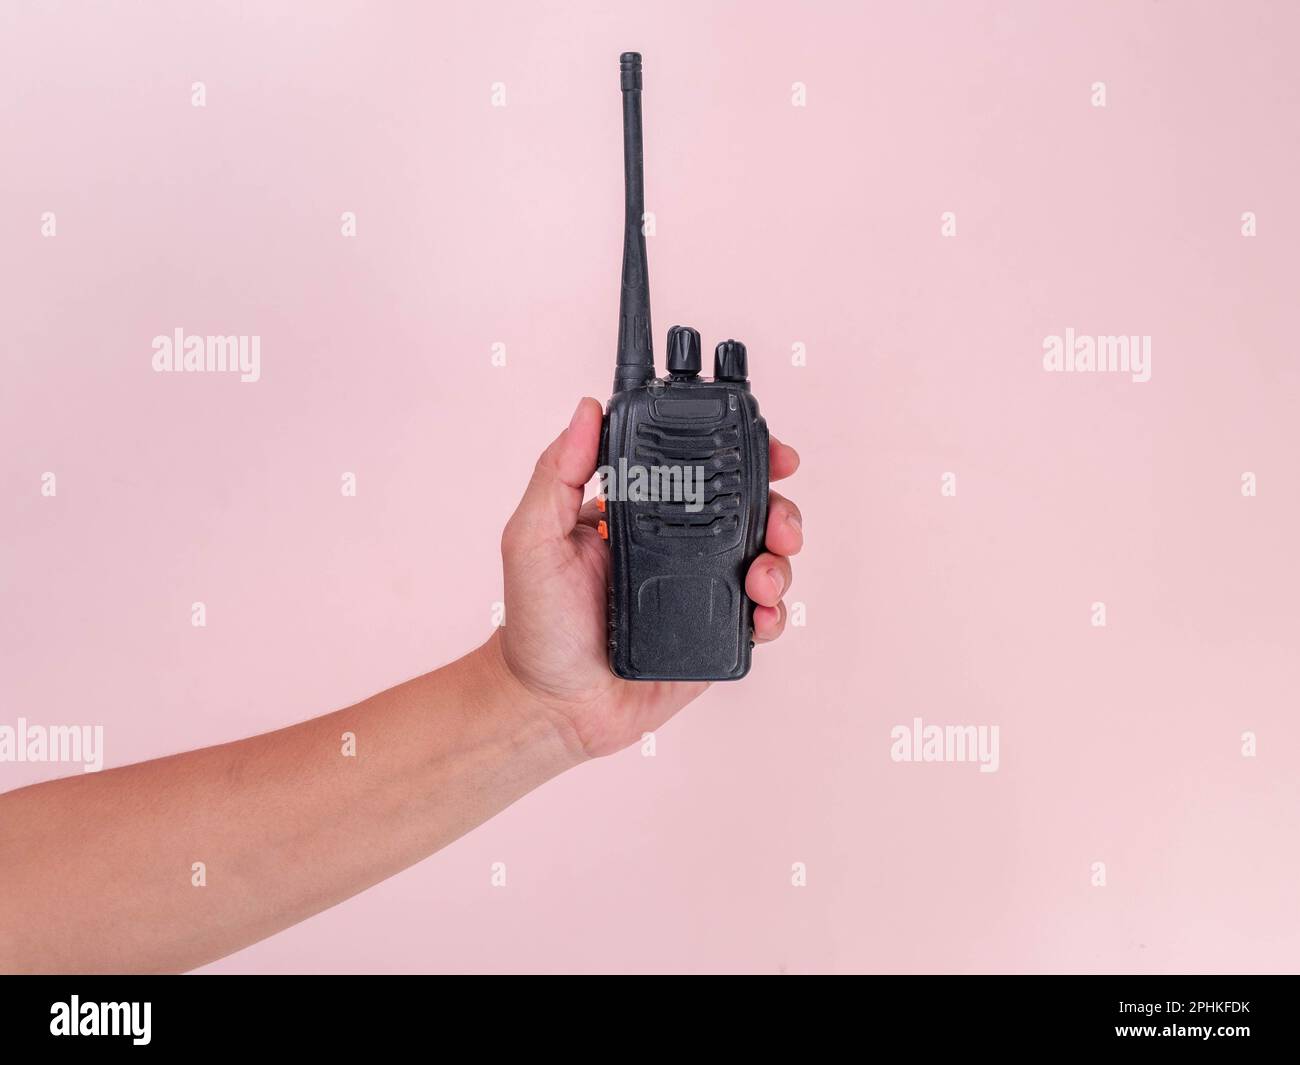 Close up hand holding portable walkie talkie isolated on pink background. Black handheld walkie talkie Stock Photo